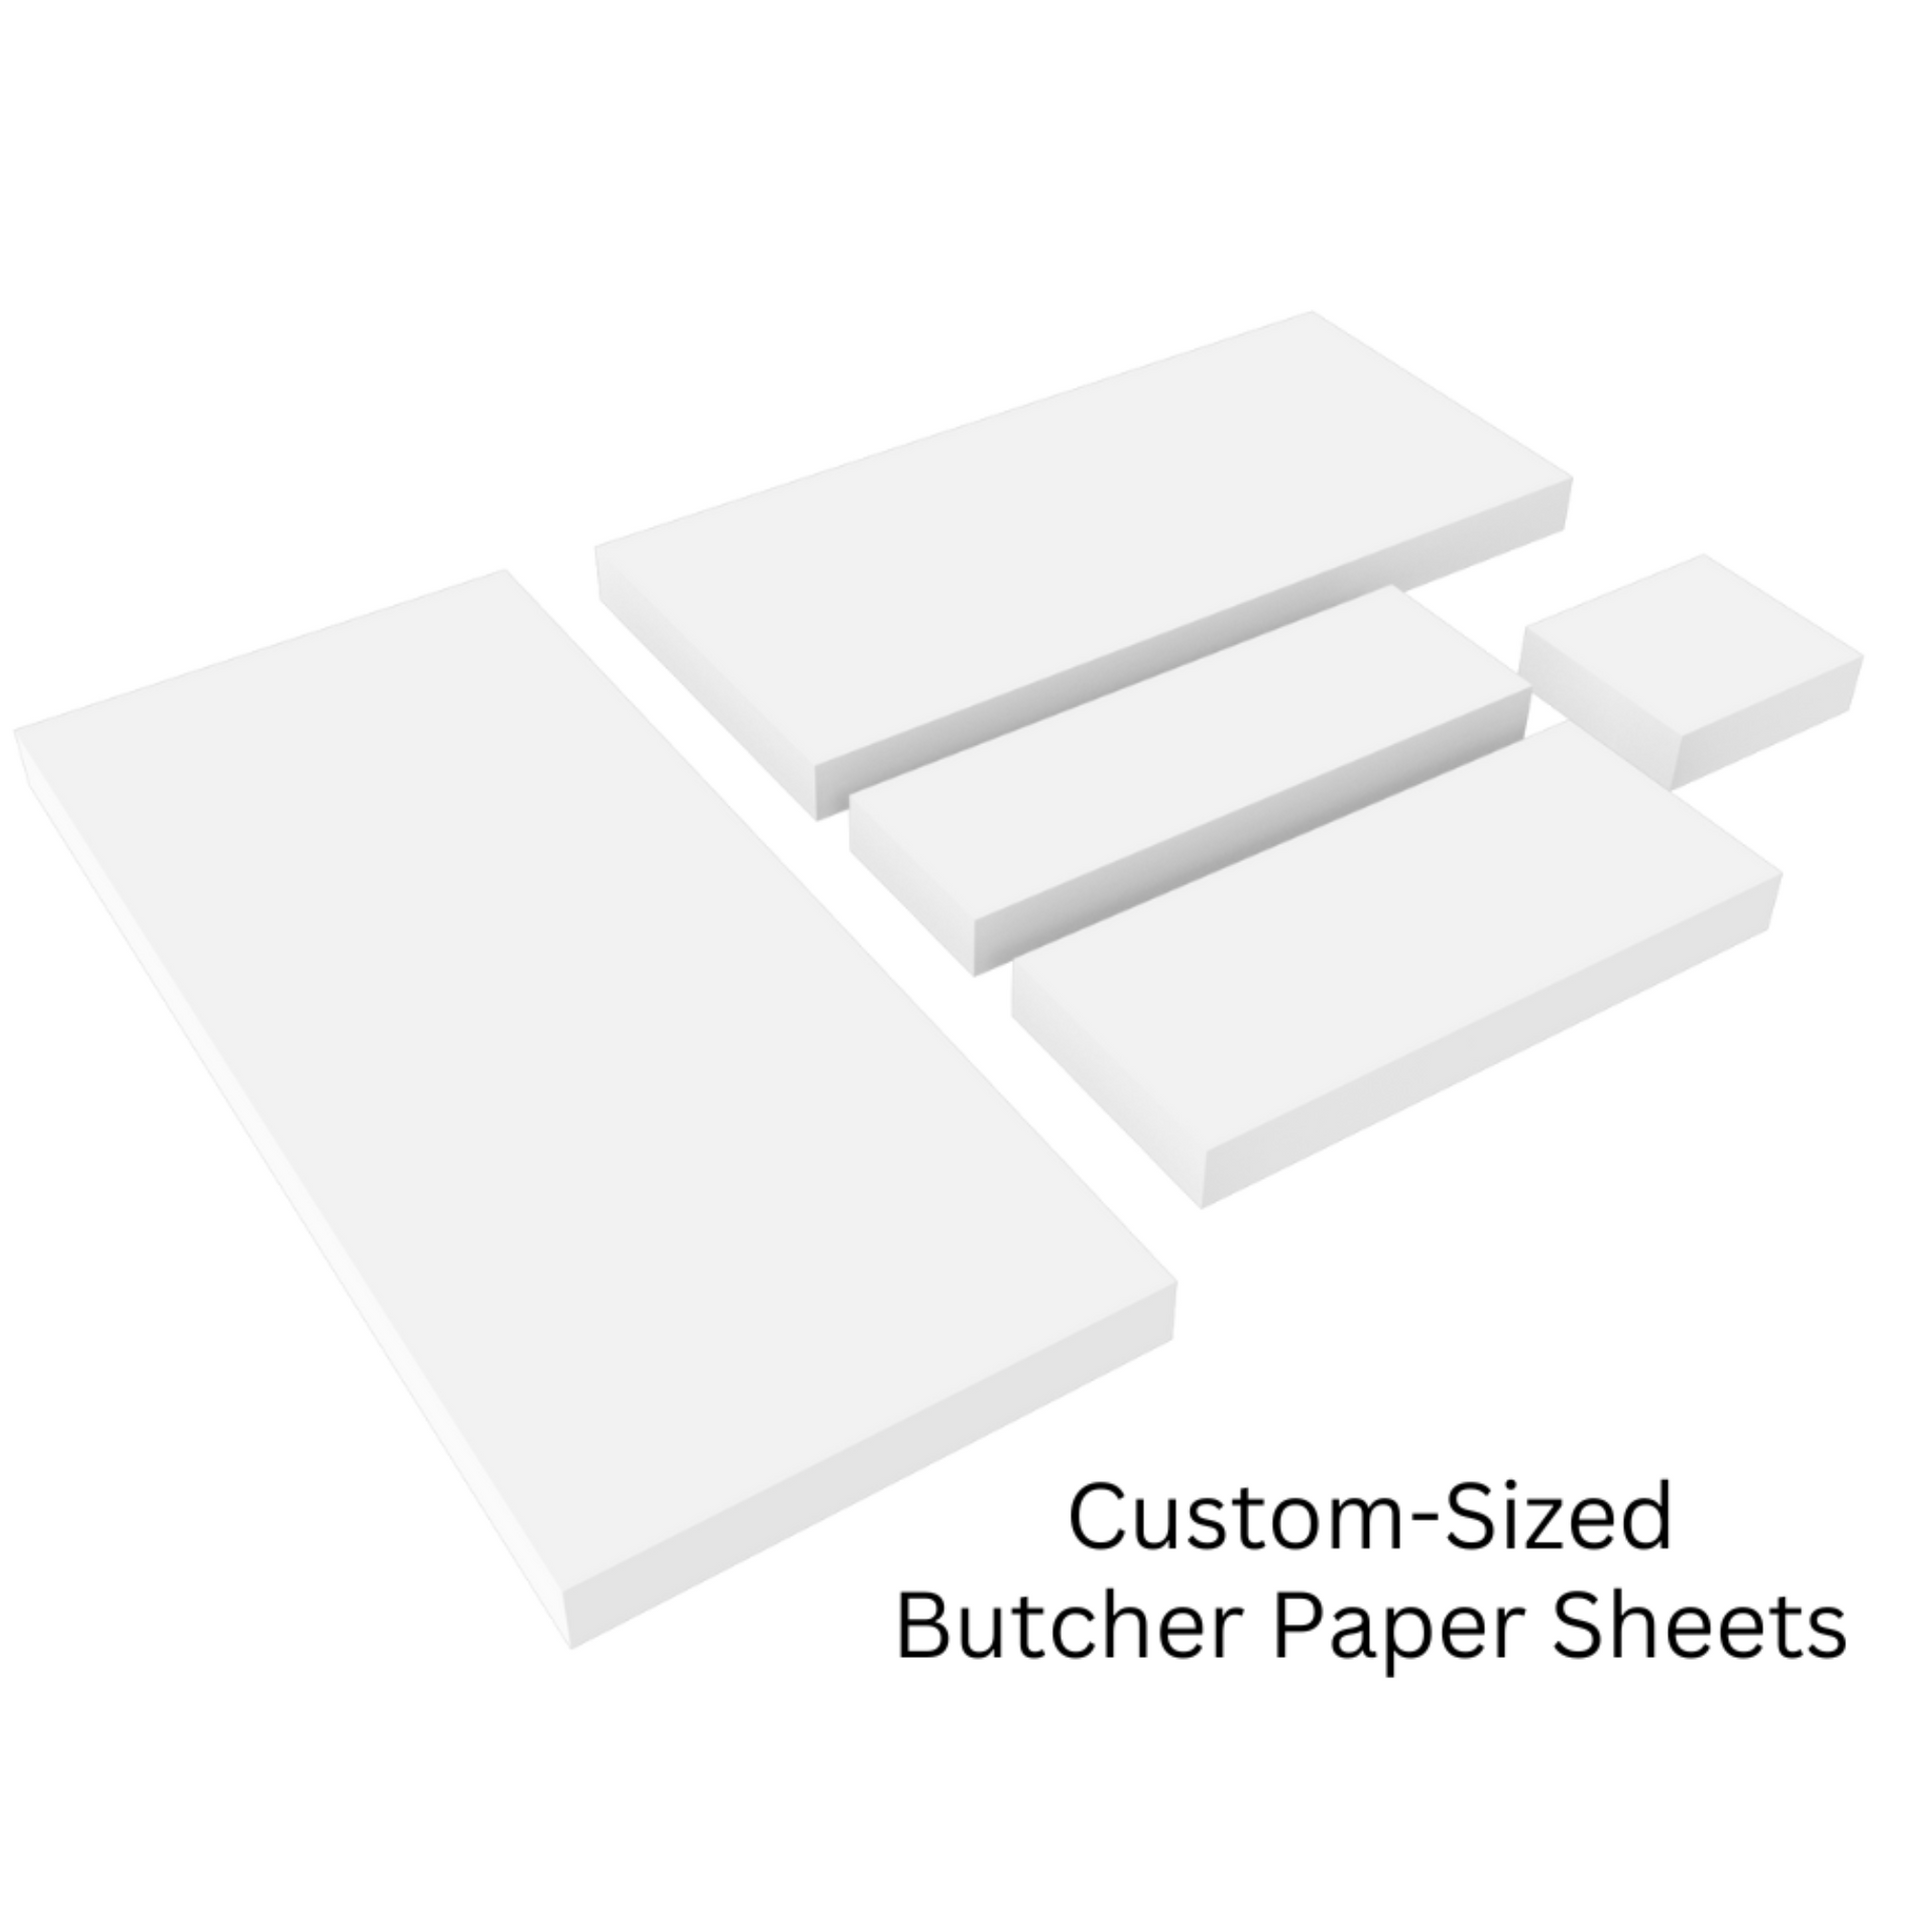  PYD Life 210 Sheets Butcher Paper For Sublimation Heat Press  Sheets 4.3 X 9.8 Inch Fit 15 OZ Mugs Print